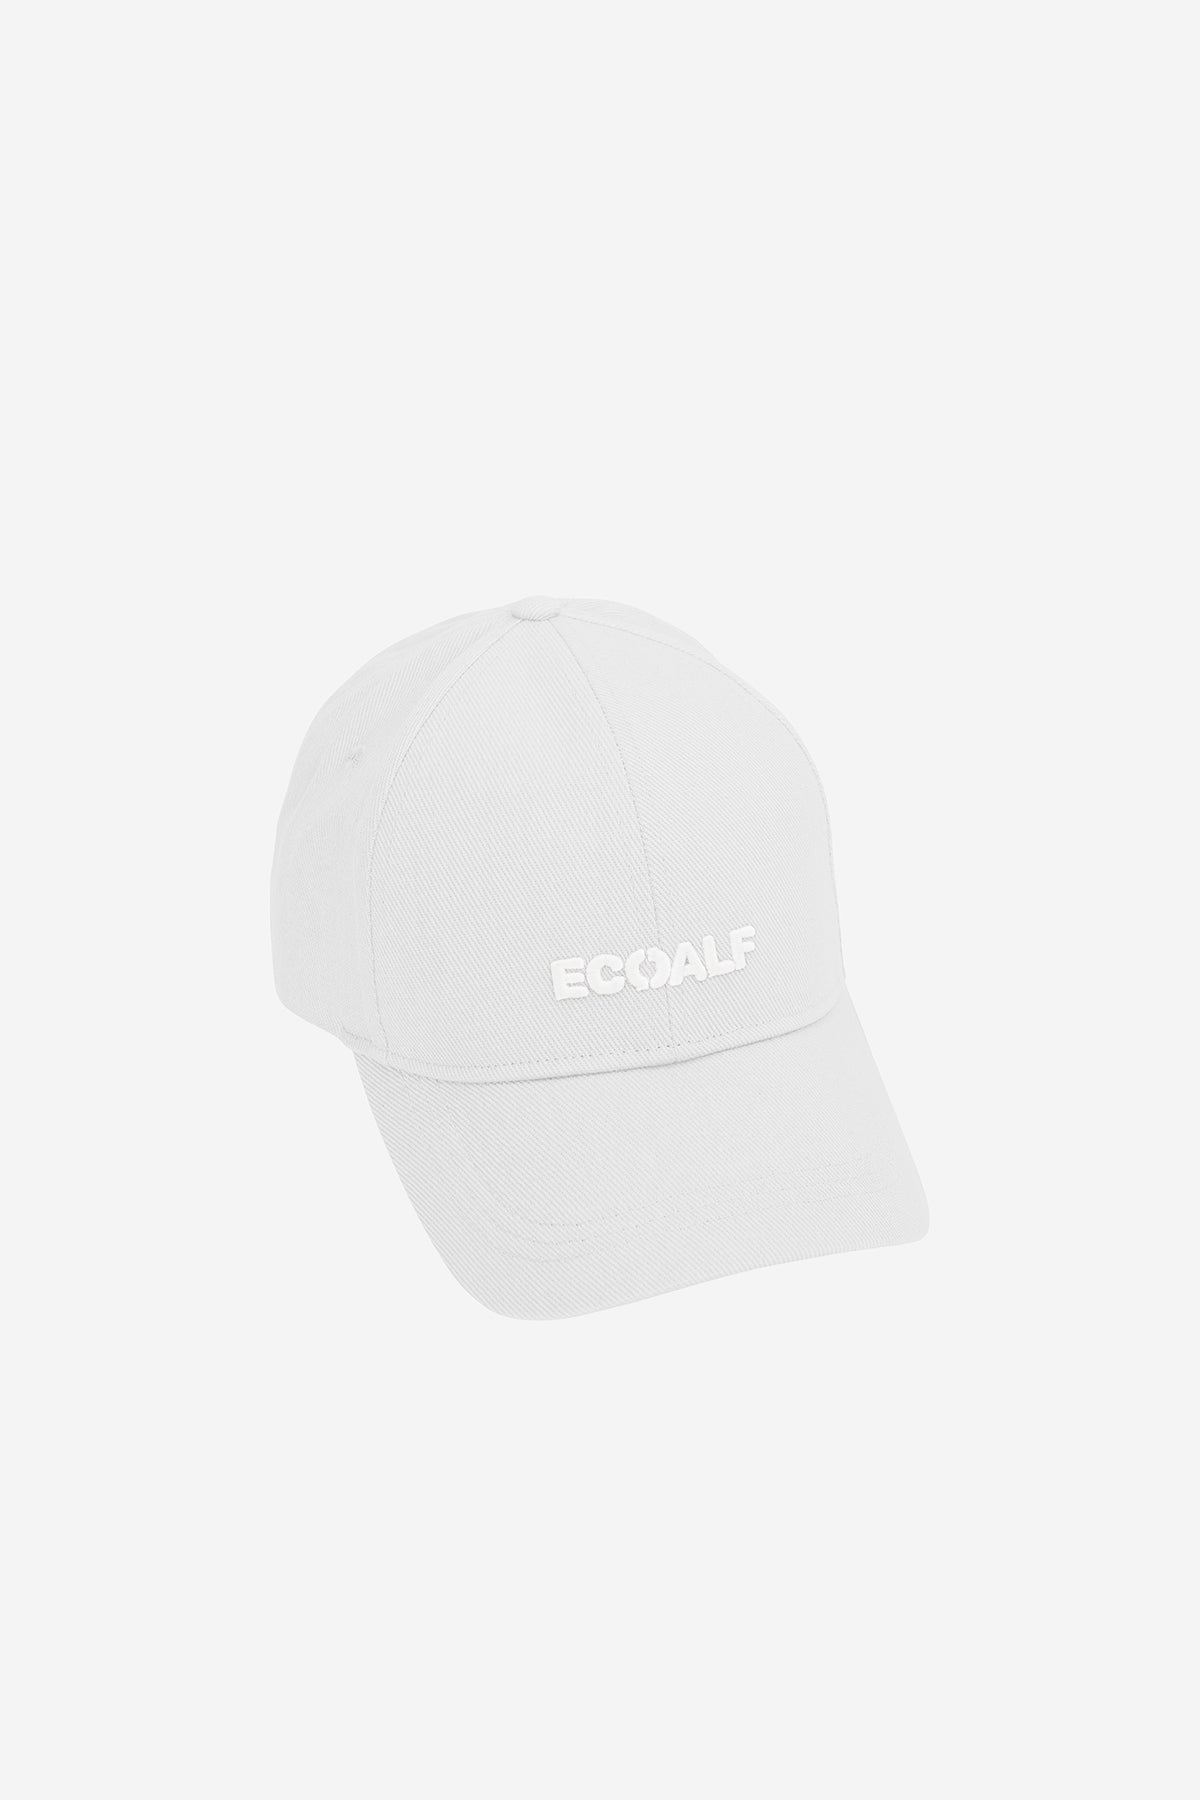 EMBROIDERED CAP WHITE